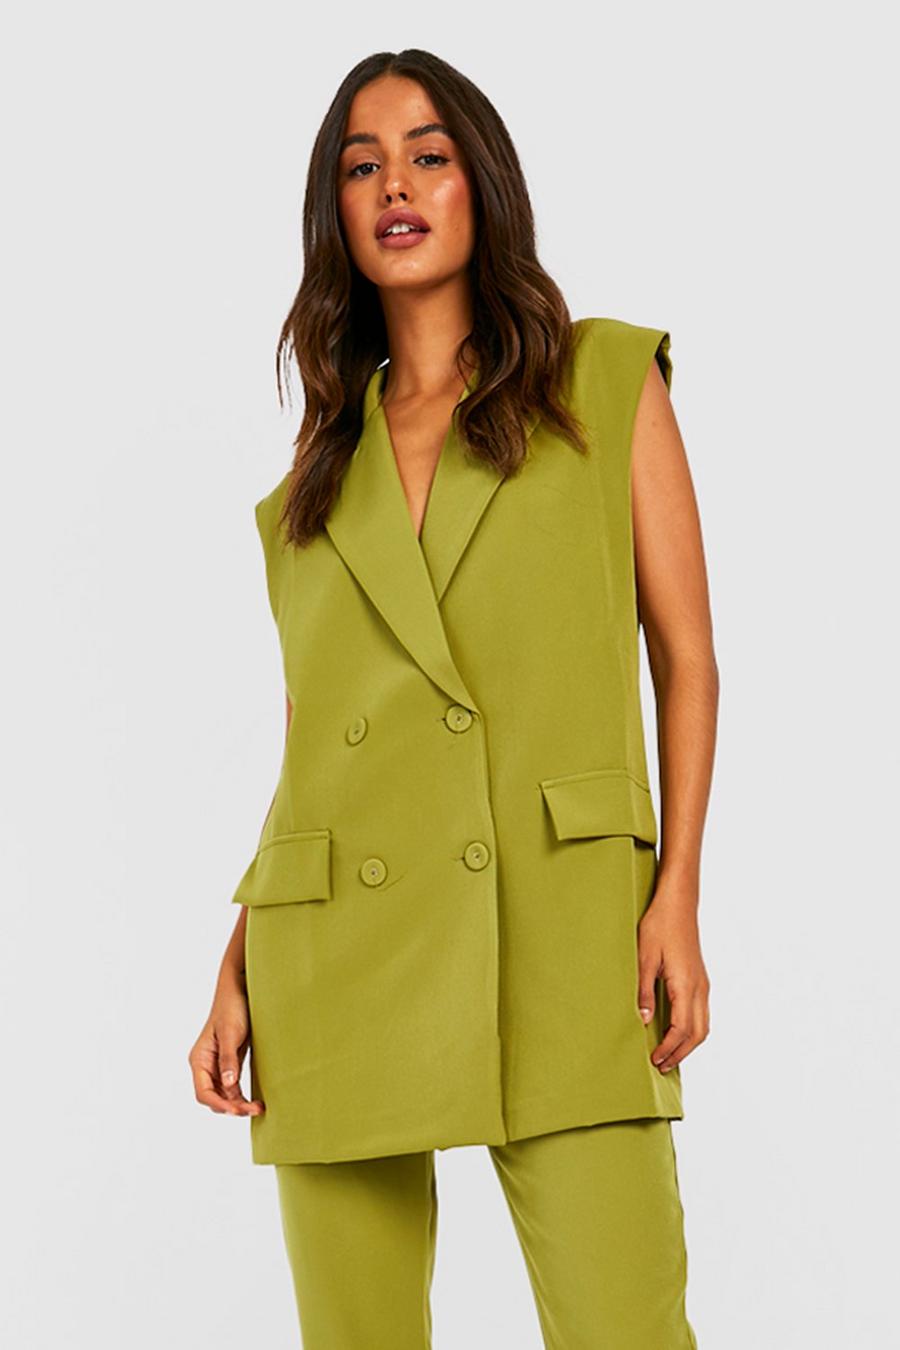 Olive green Tailored Double Breasted Sleeveless Blazer